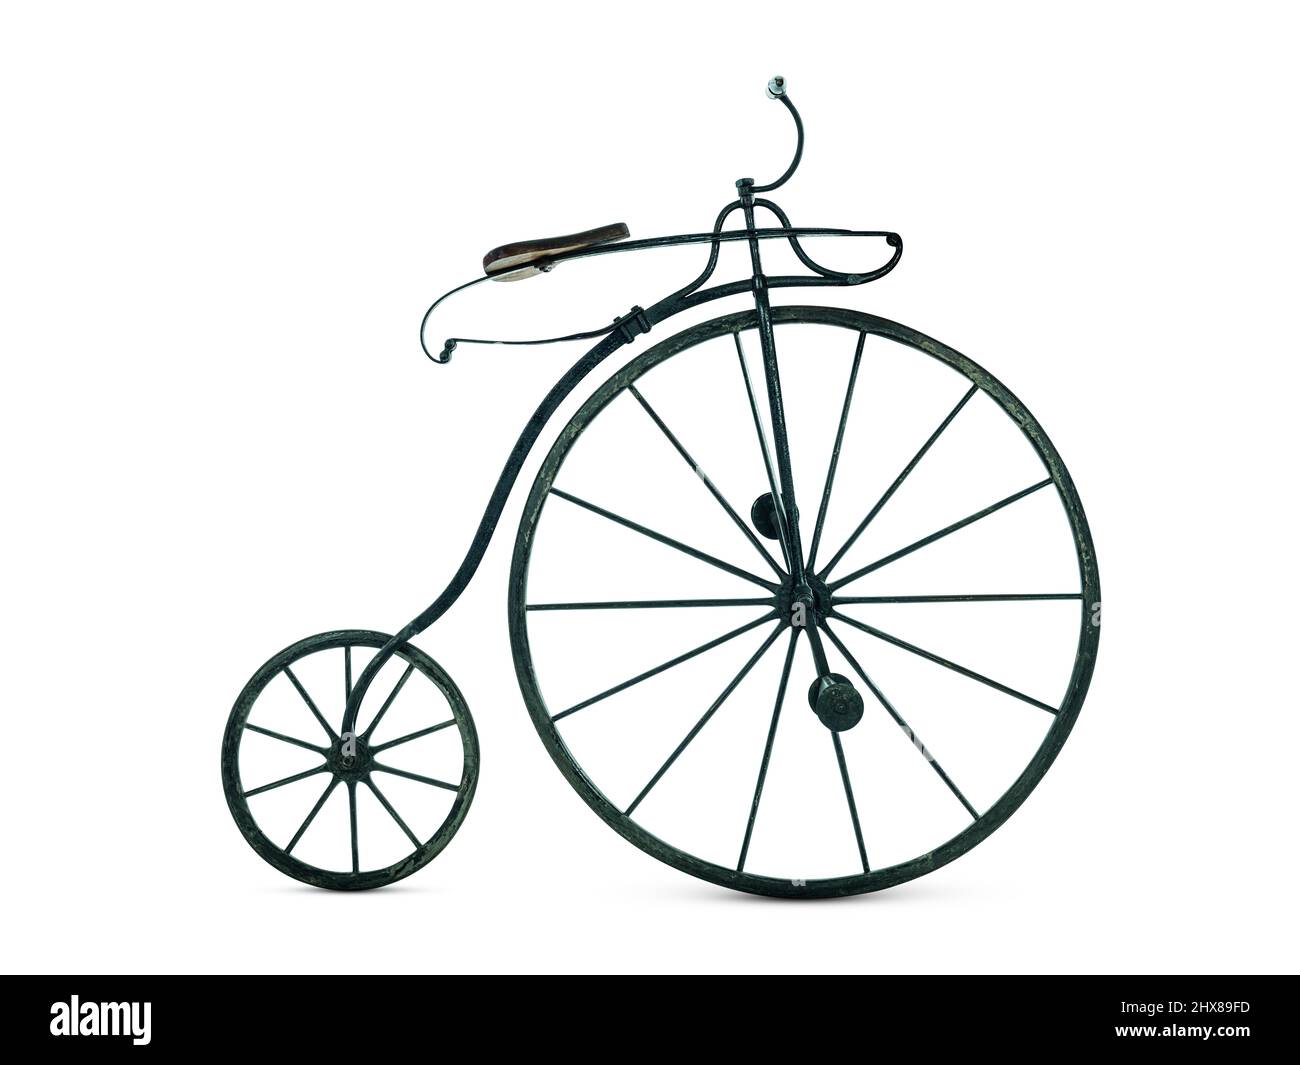 Transition velocipede, c.1869/1870, Side view Stock Photo